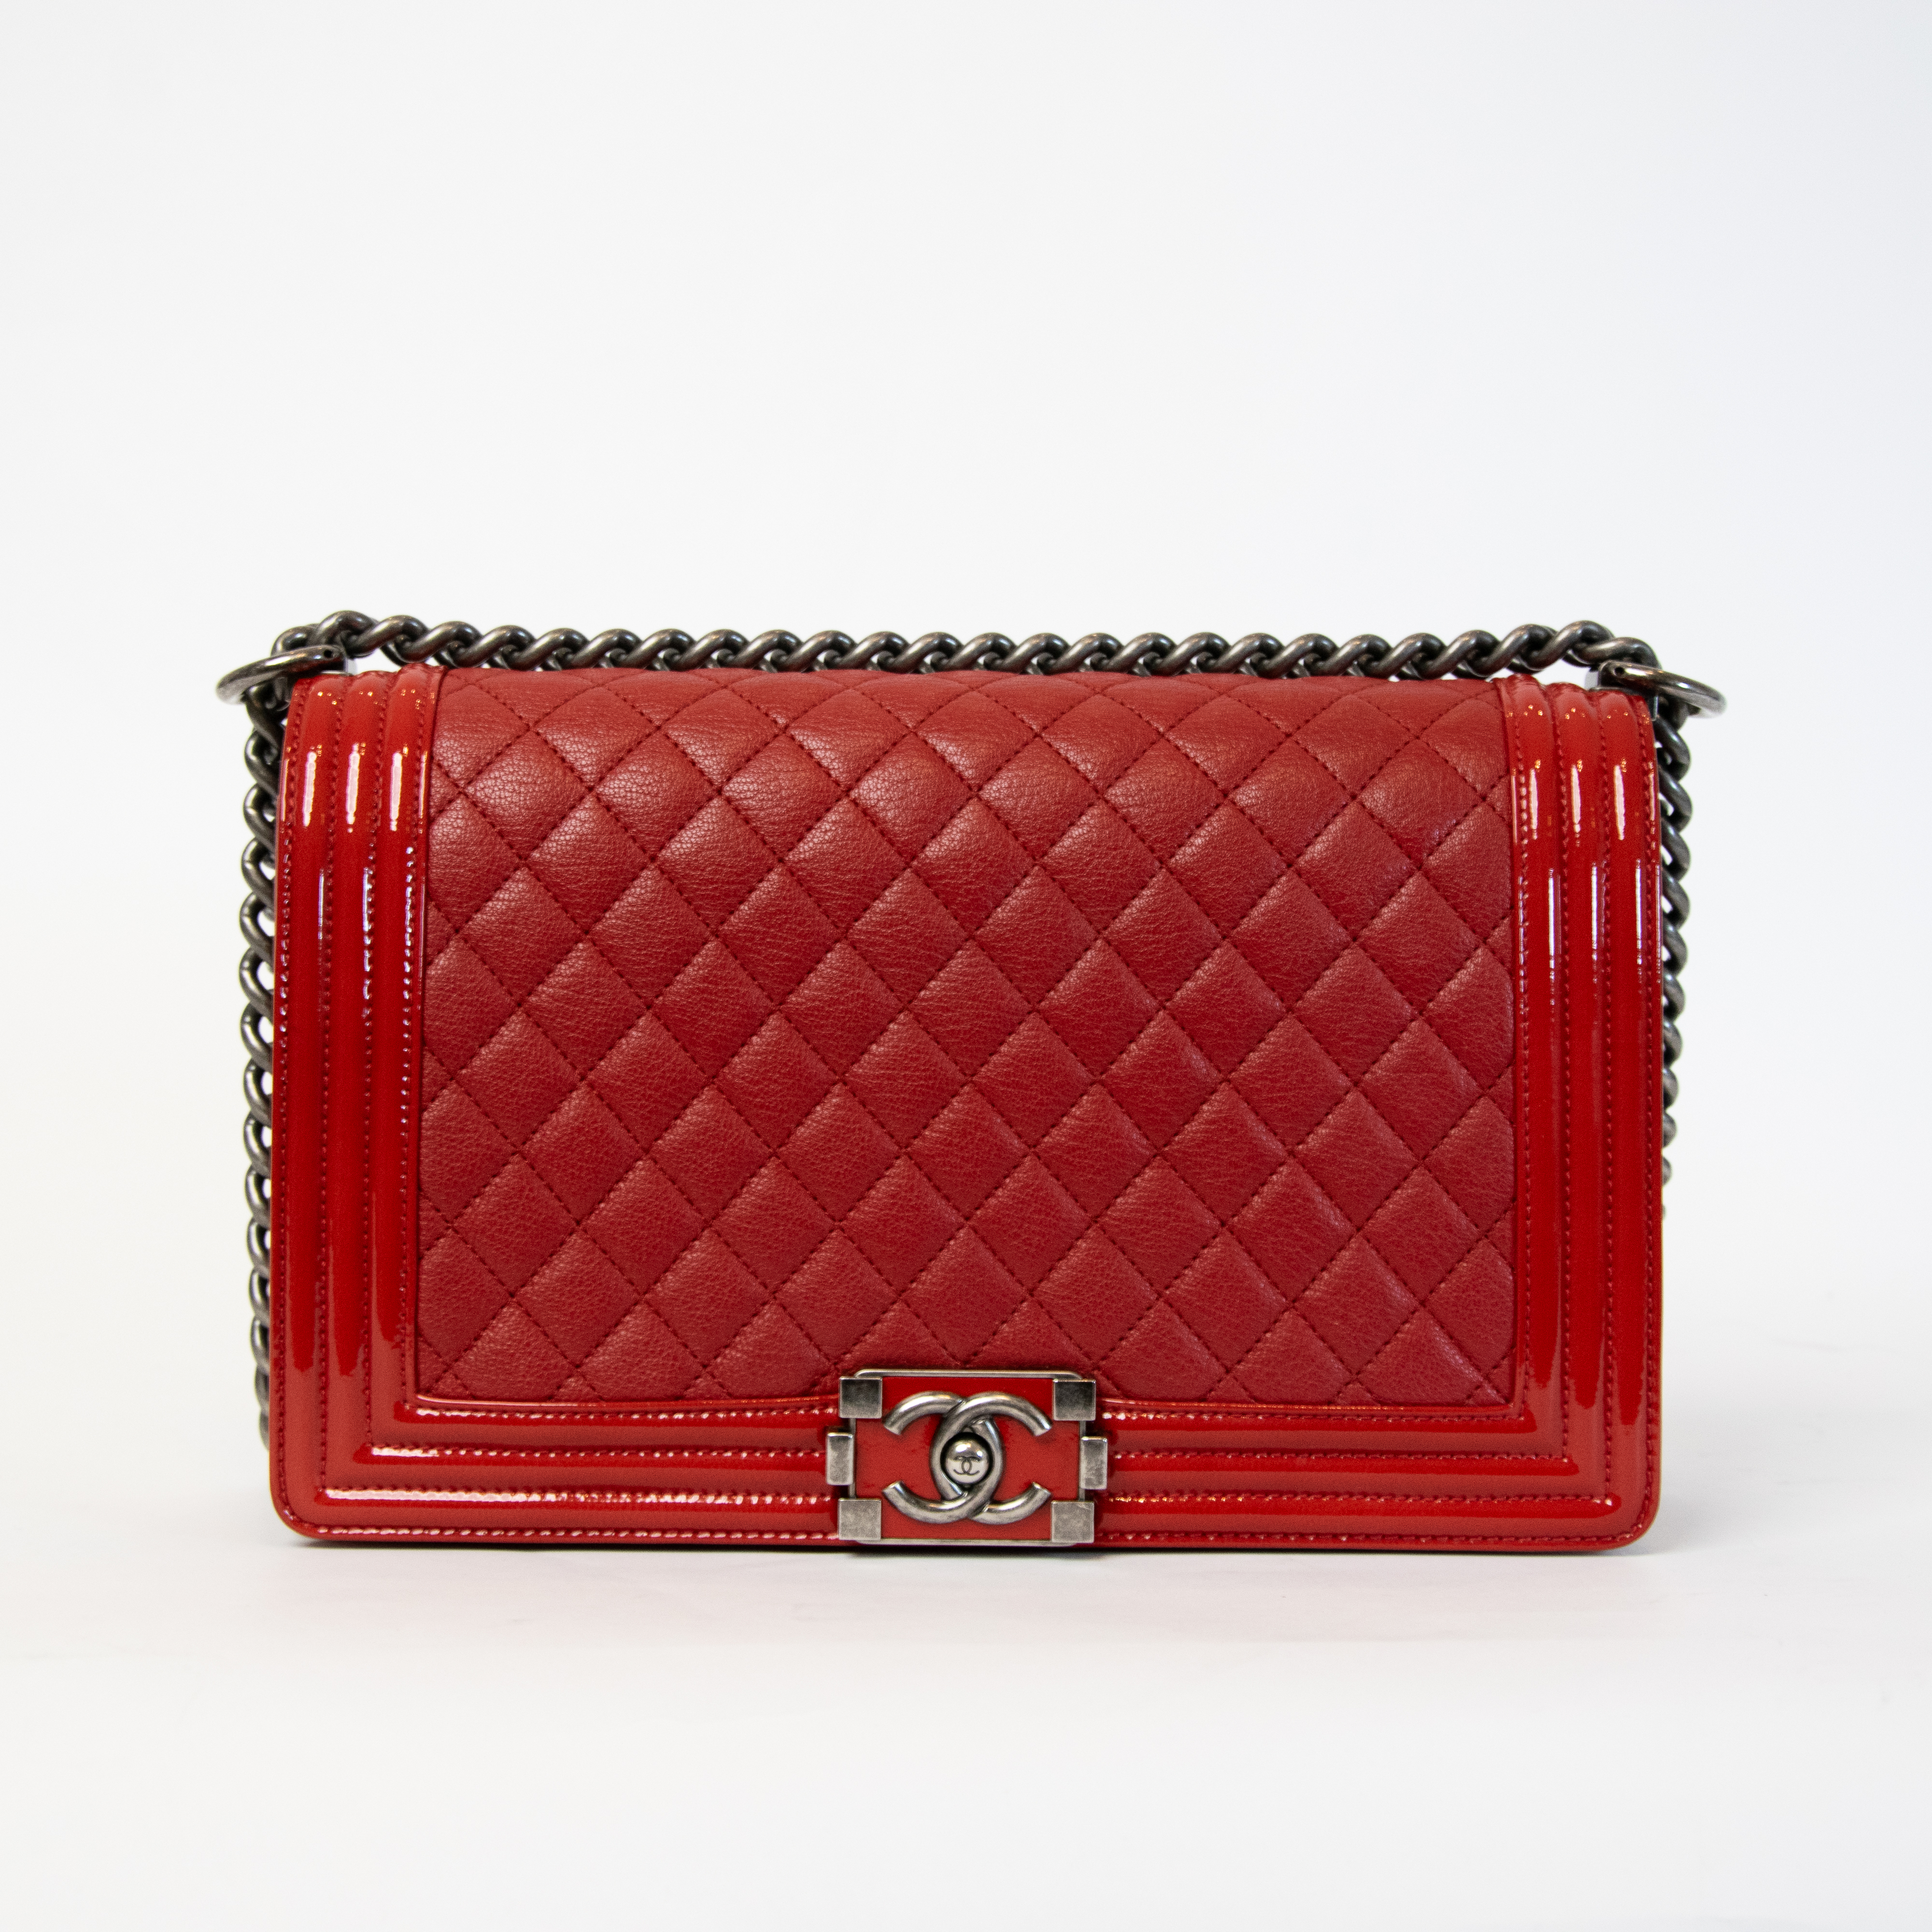 Chanel Boy Red Calfskin with patent leather Super condition